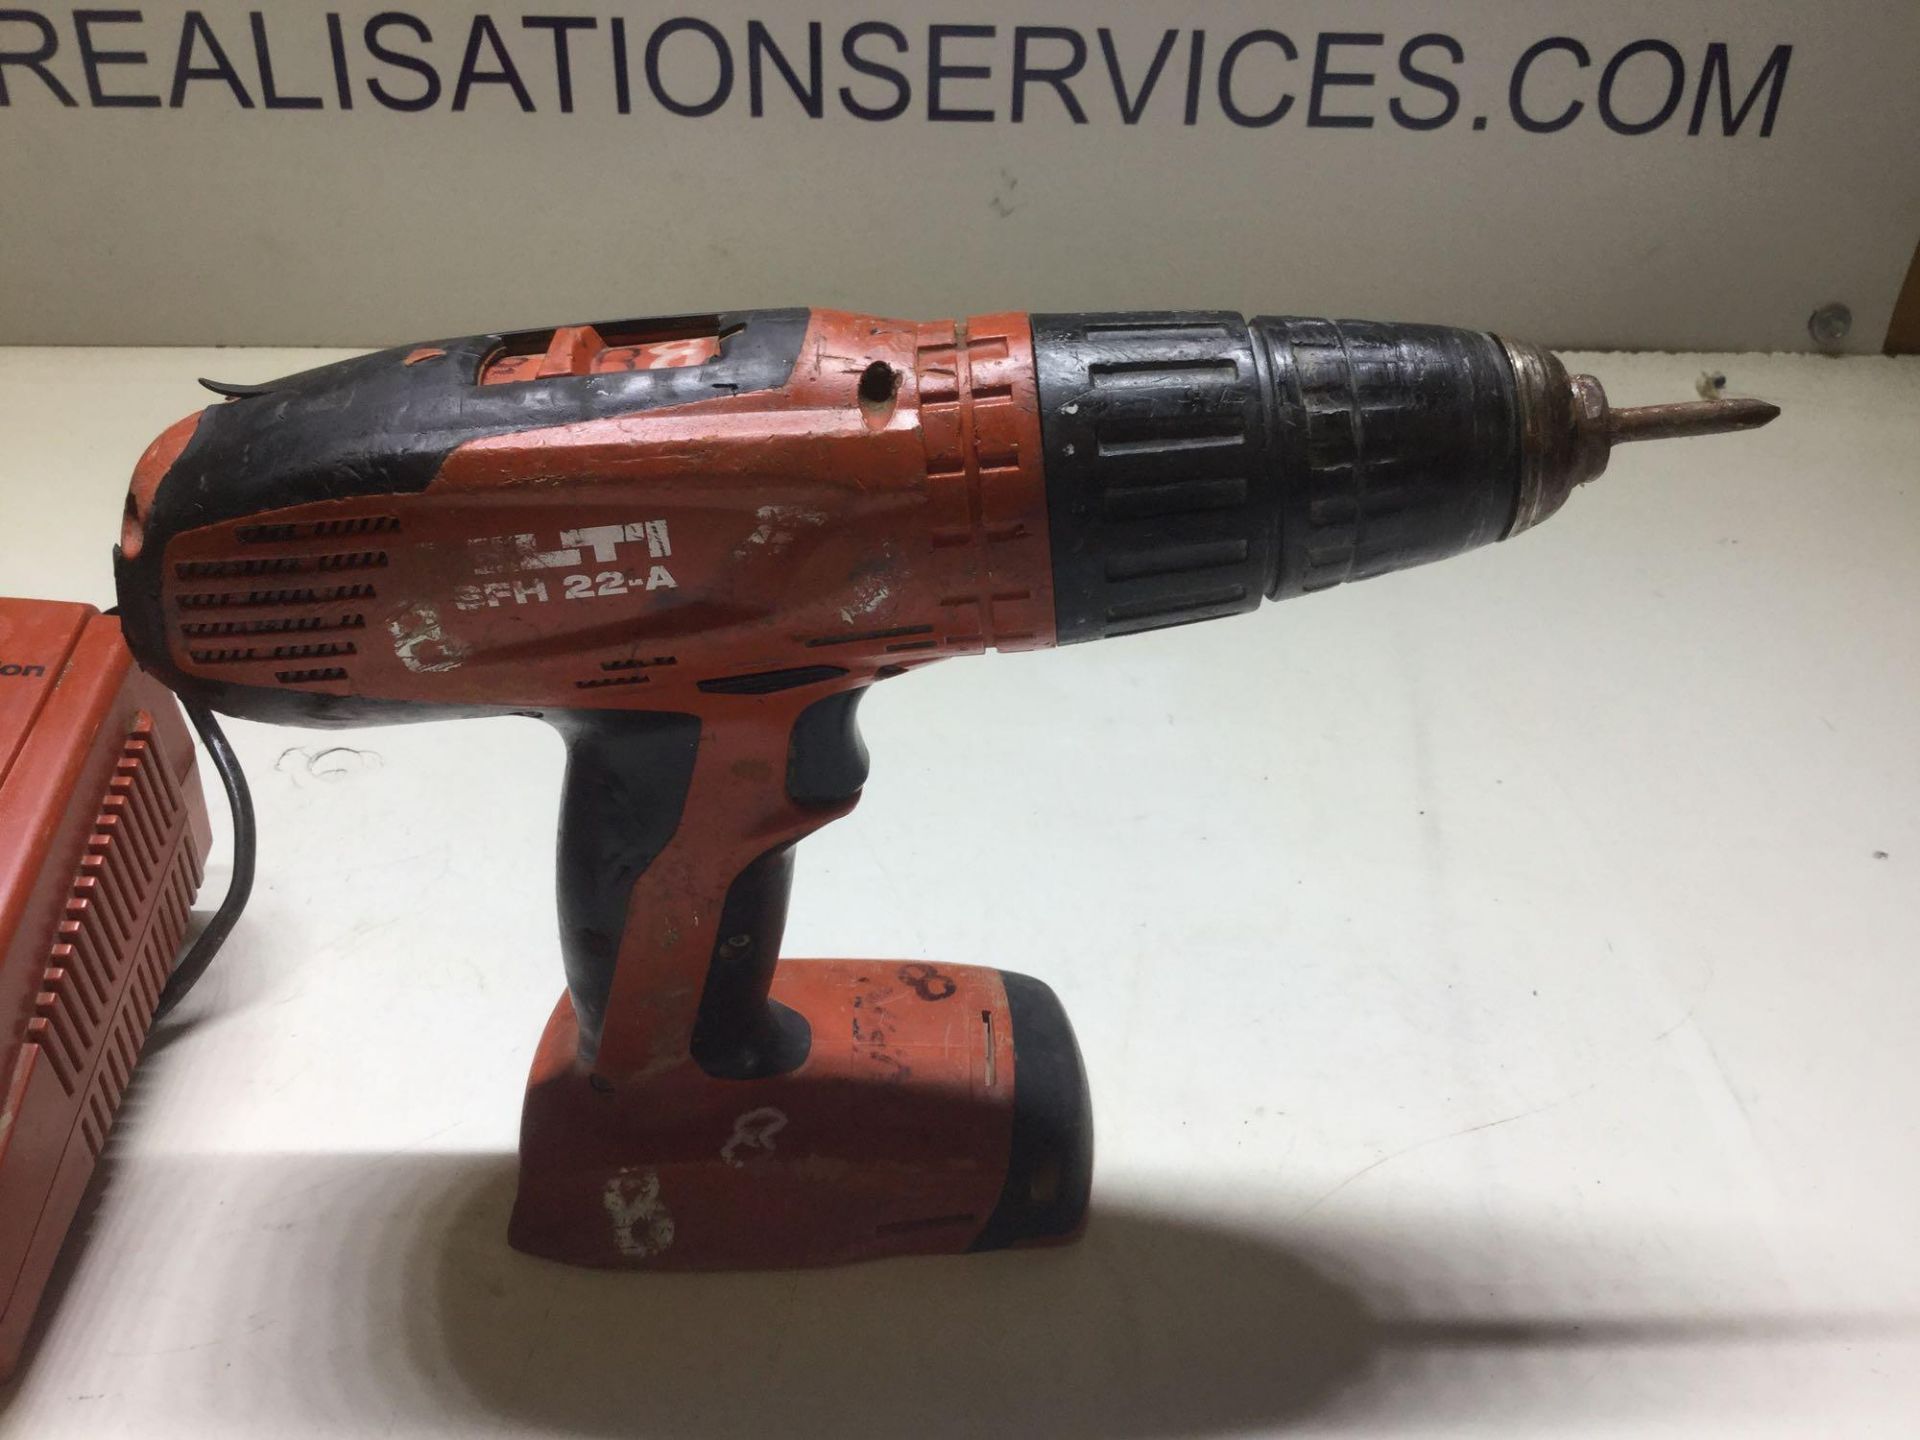 Hilti SFH 22-H Cordless Hammer Drill With Charger & Battery - Image 3 of 4